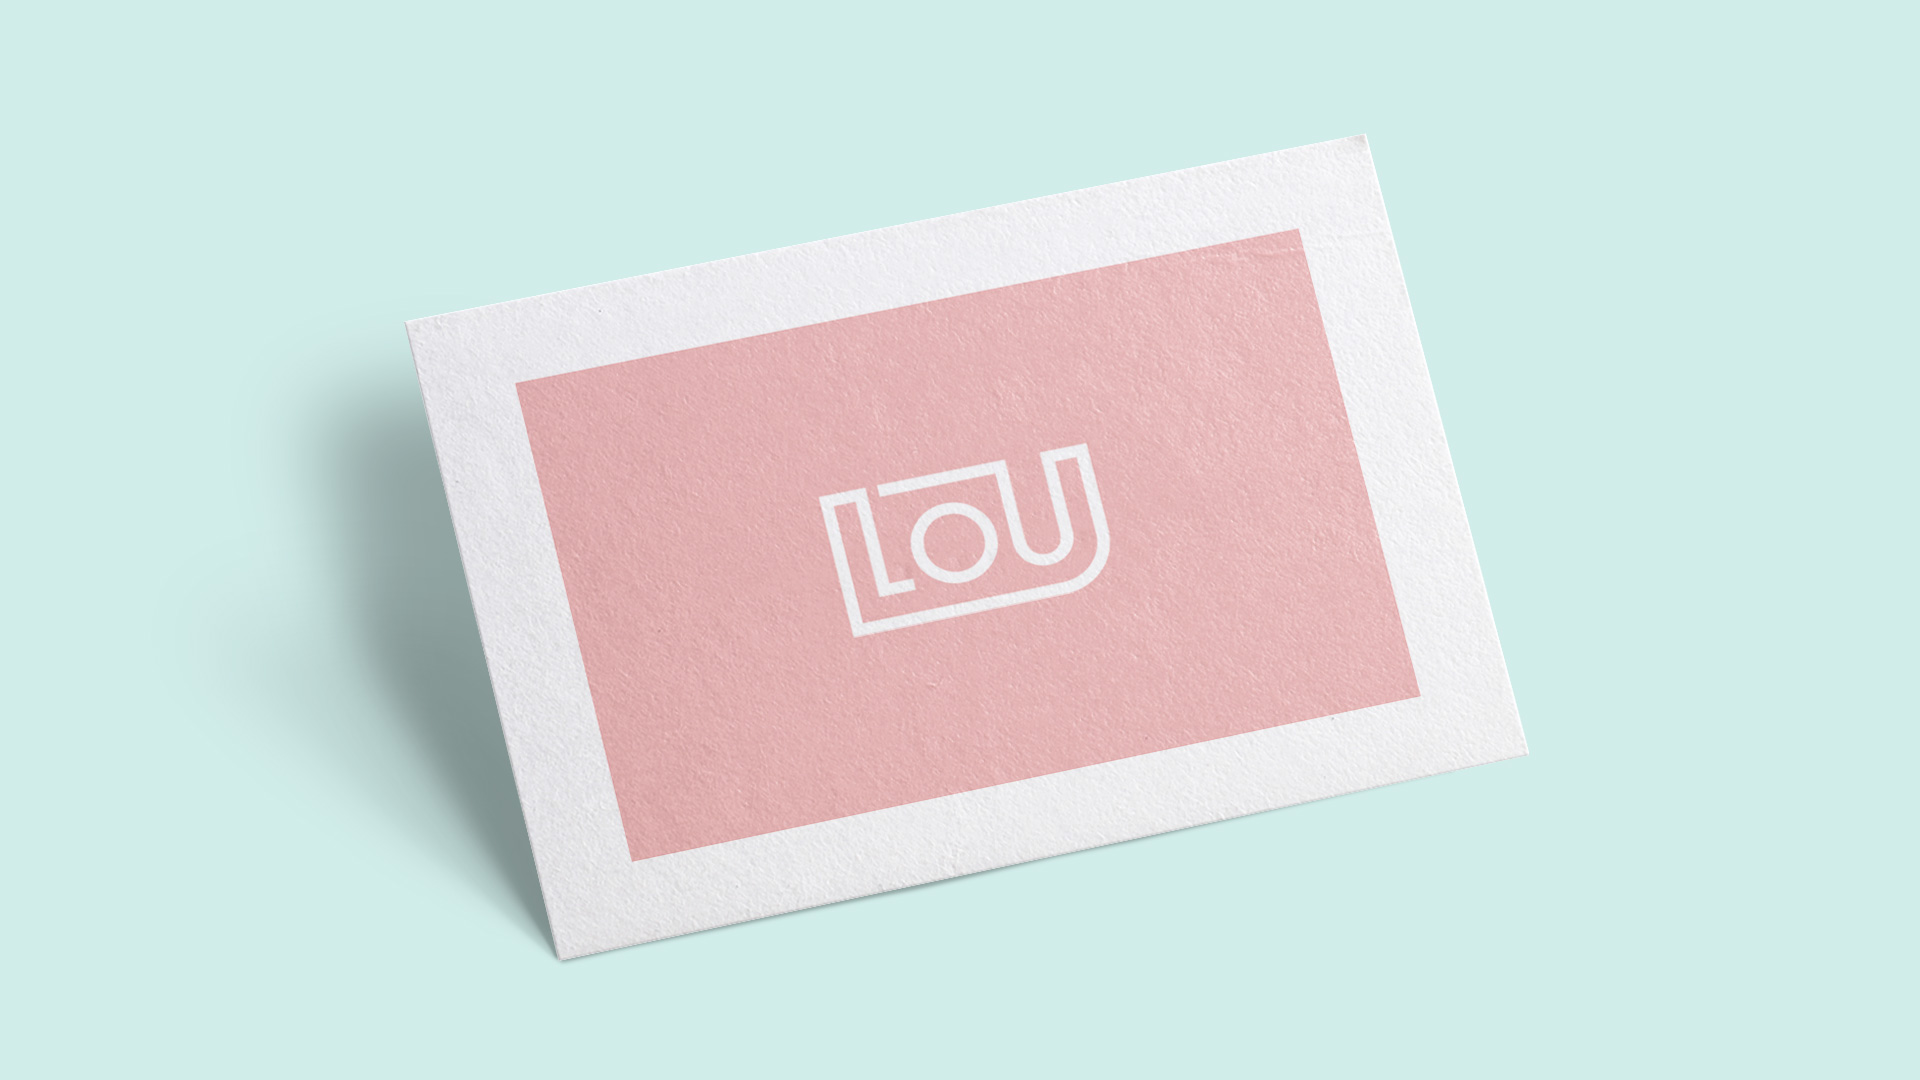 Lou Jewels Business Cards - Zoom